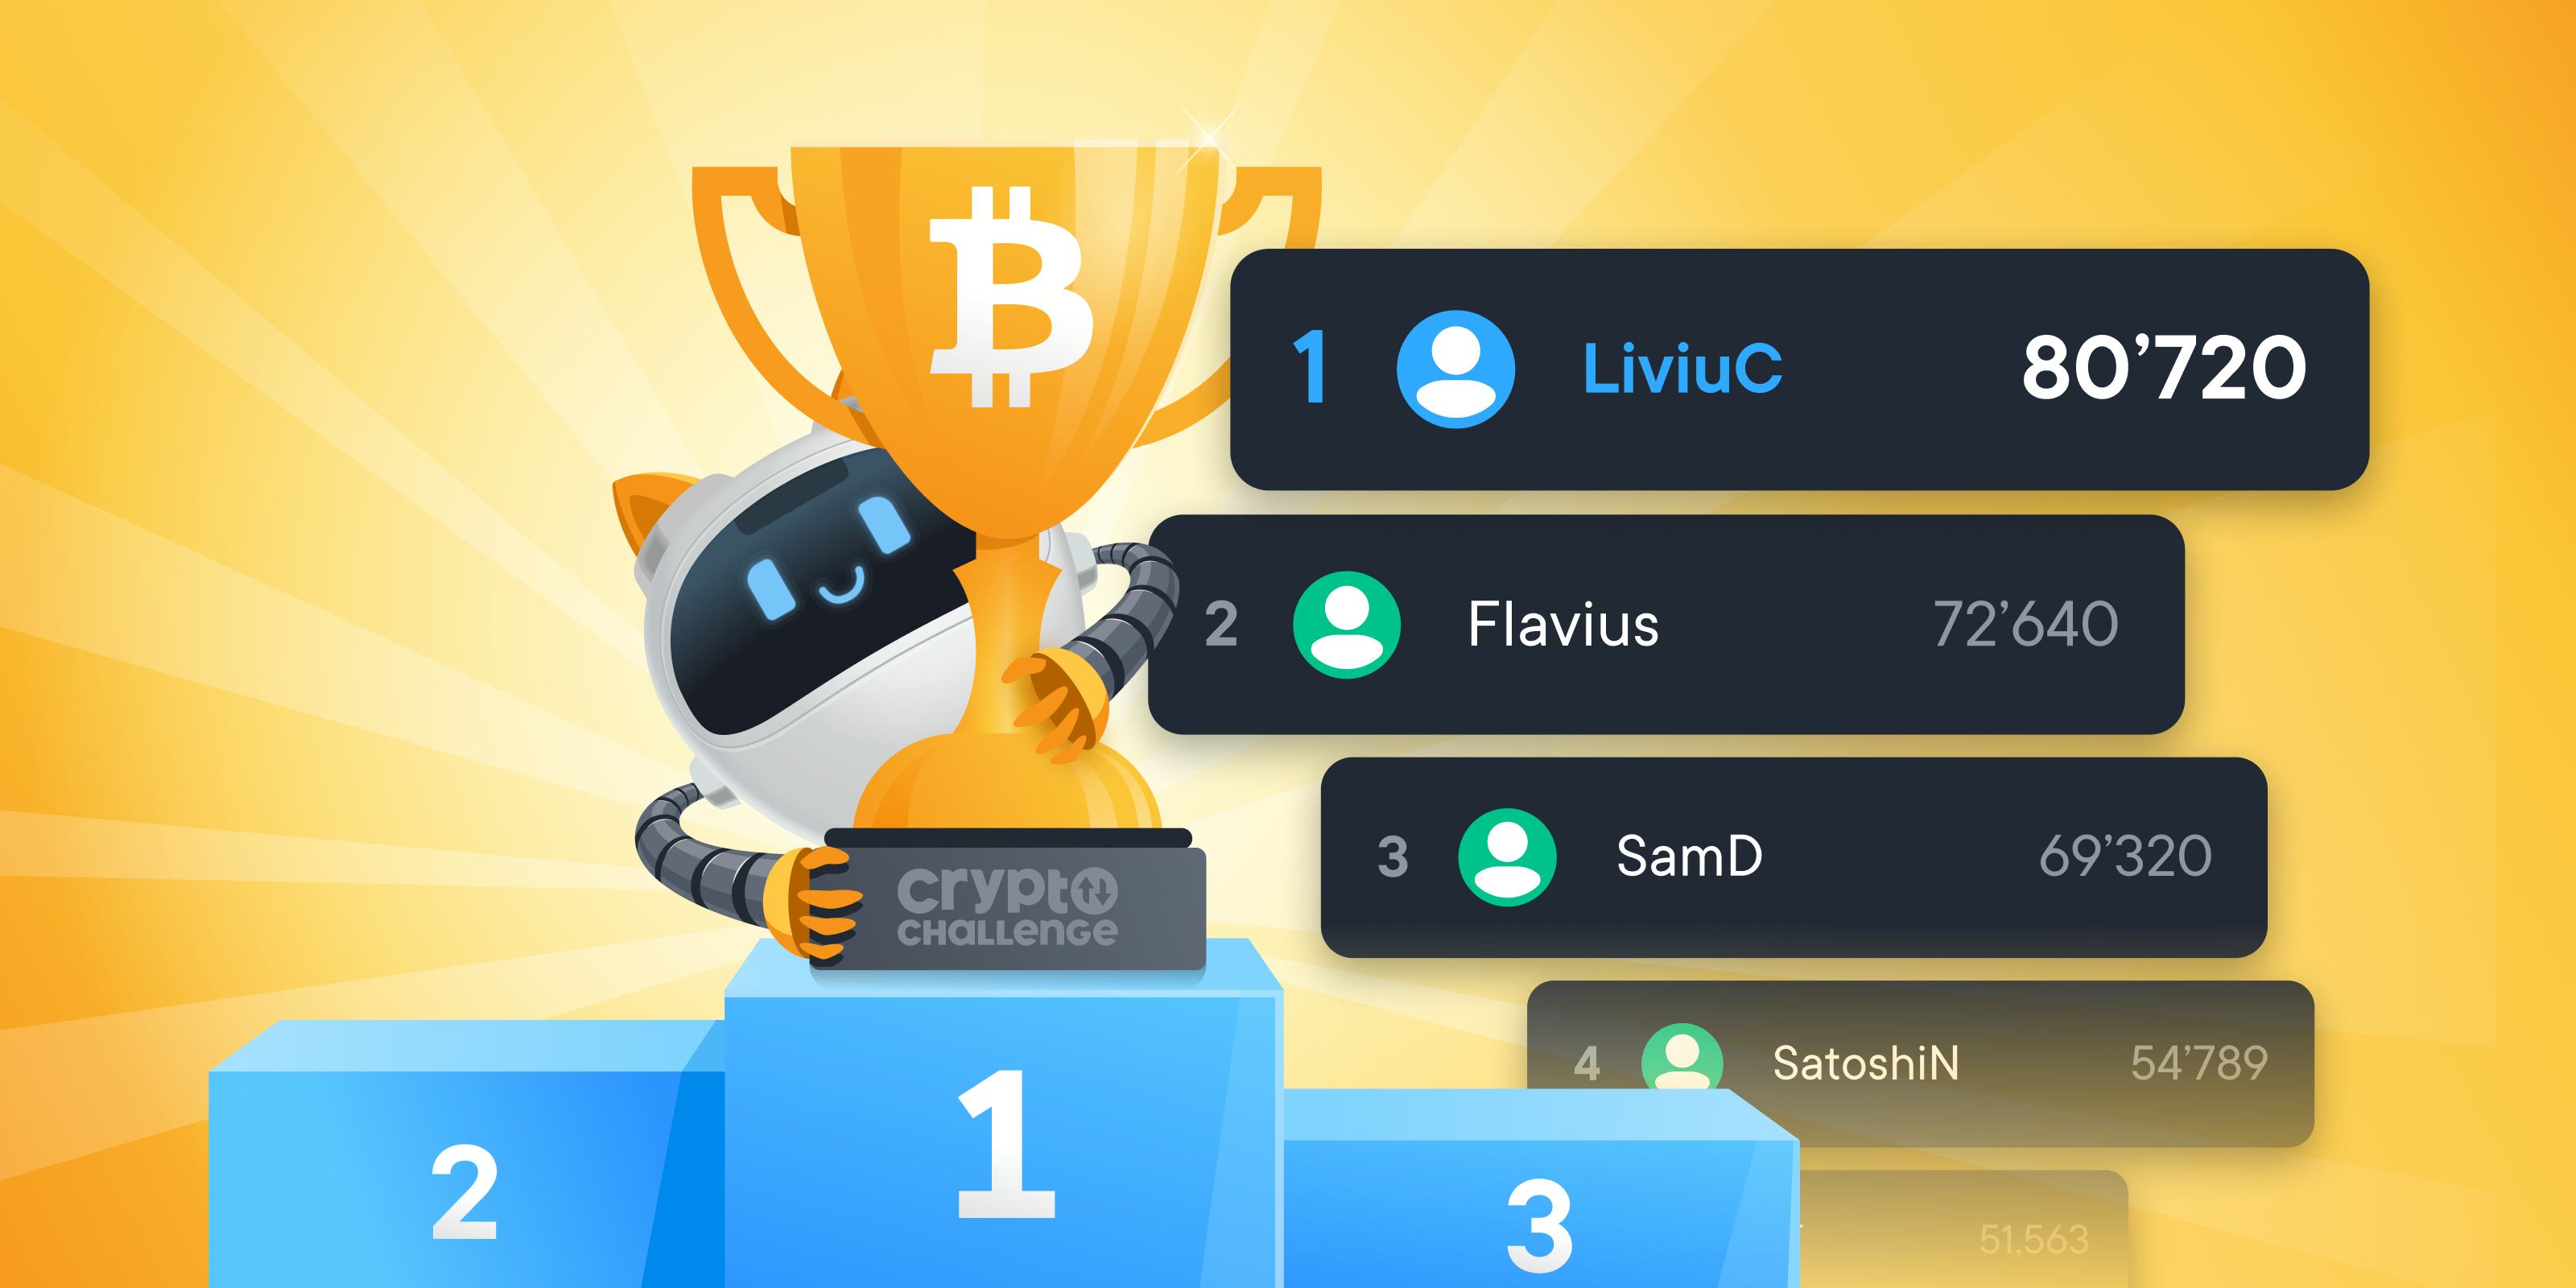 CryptoChallenge leaderboard on Android and iOS